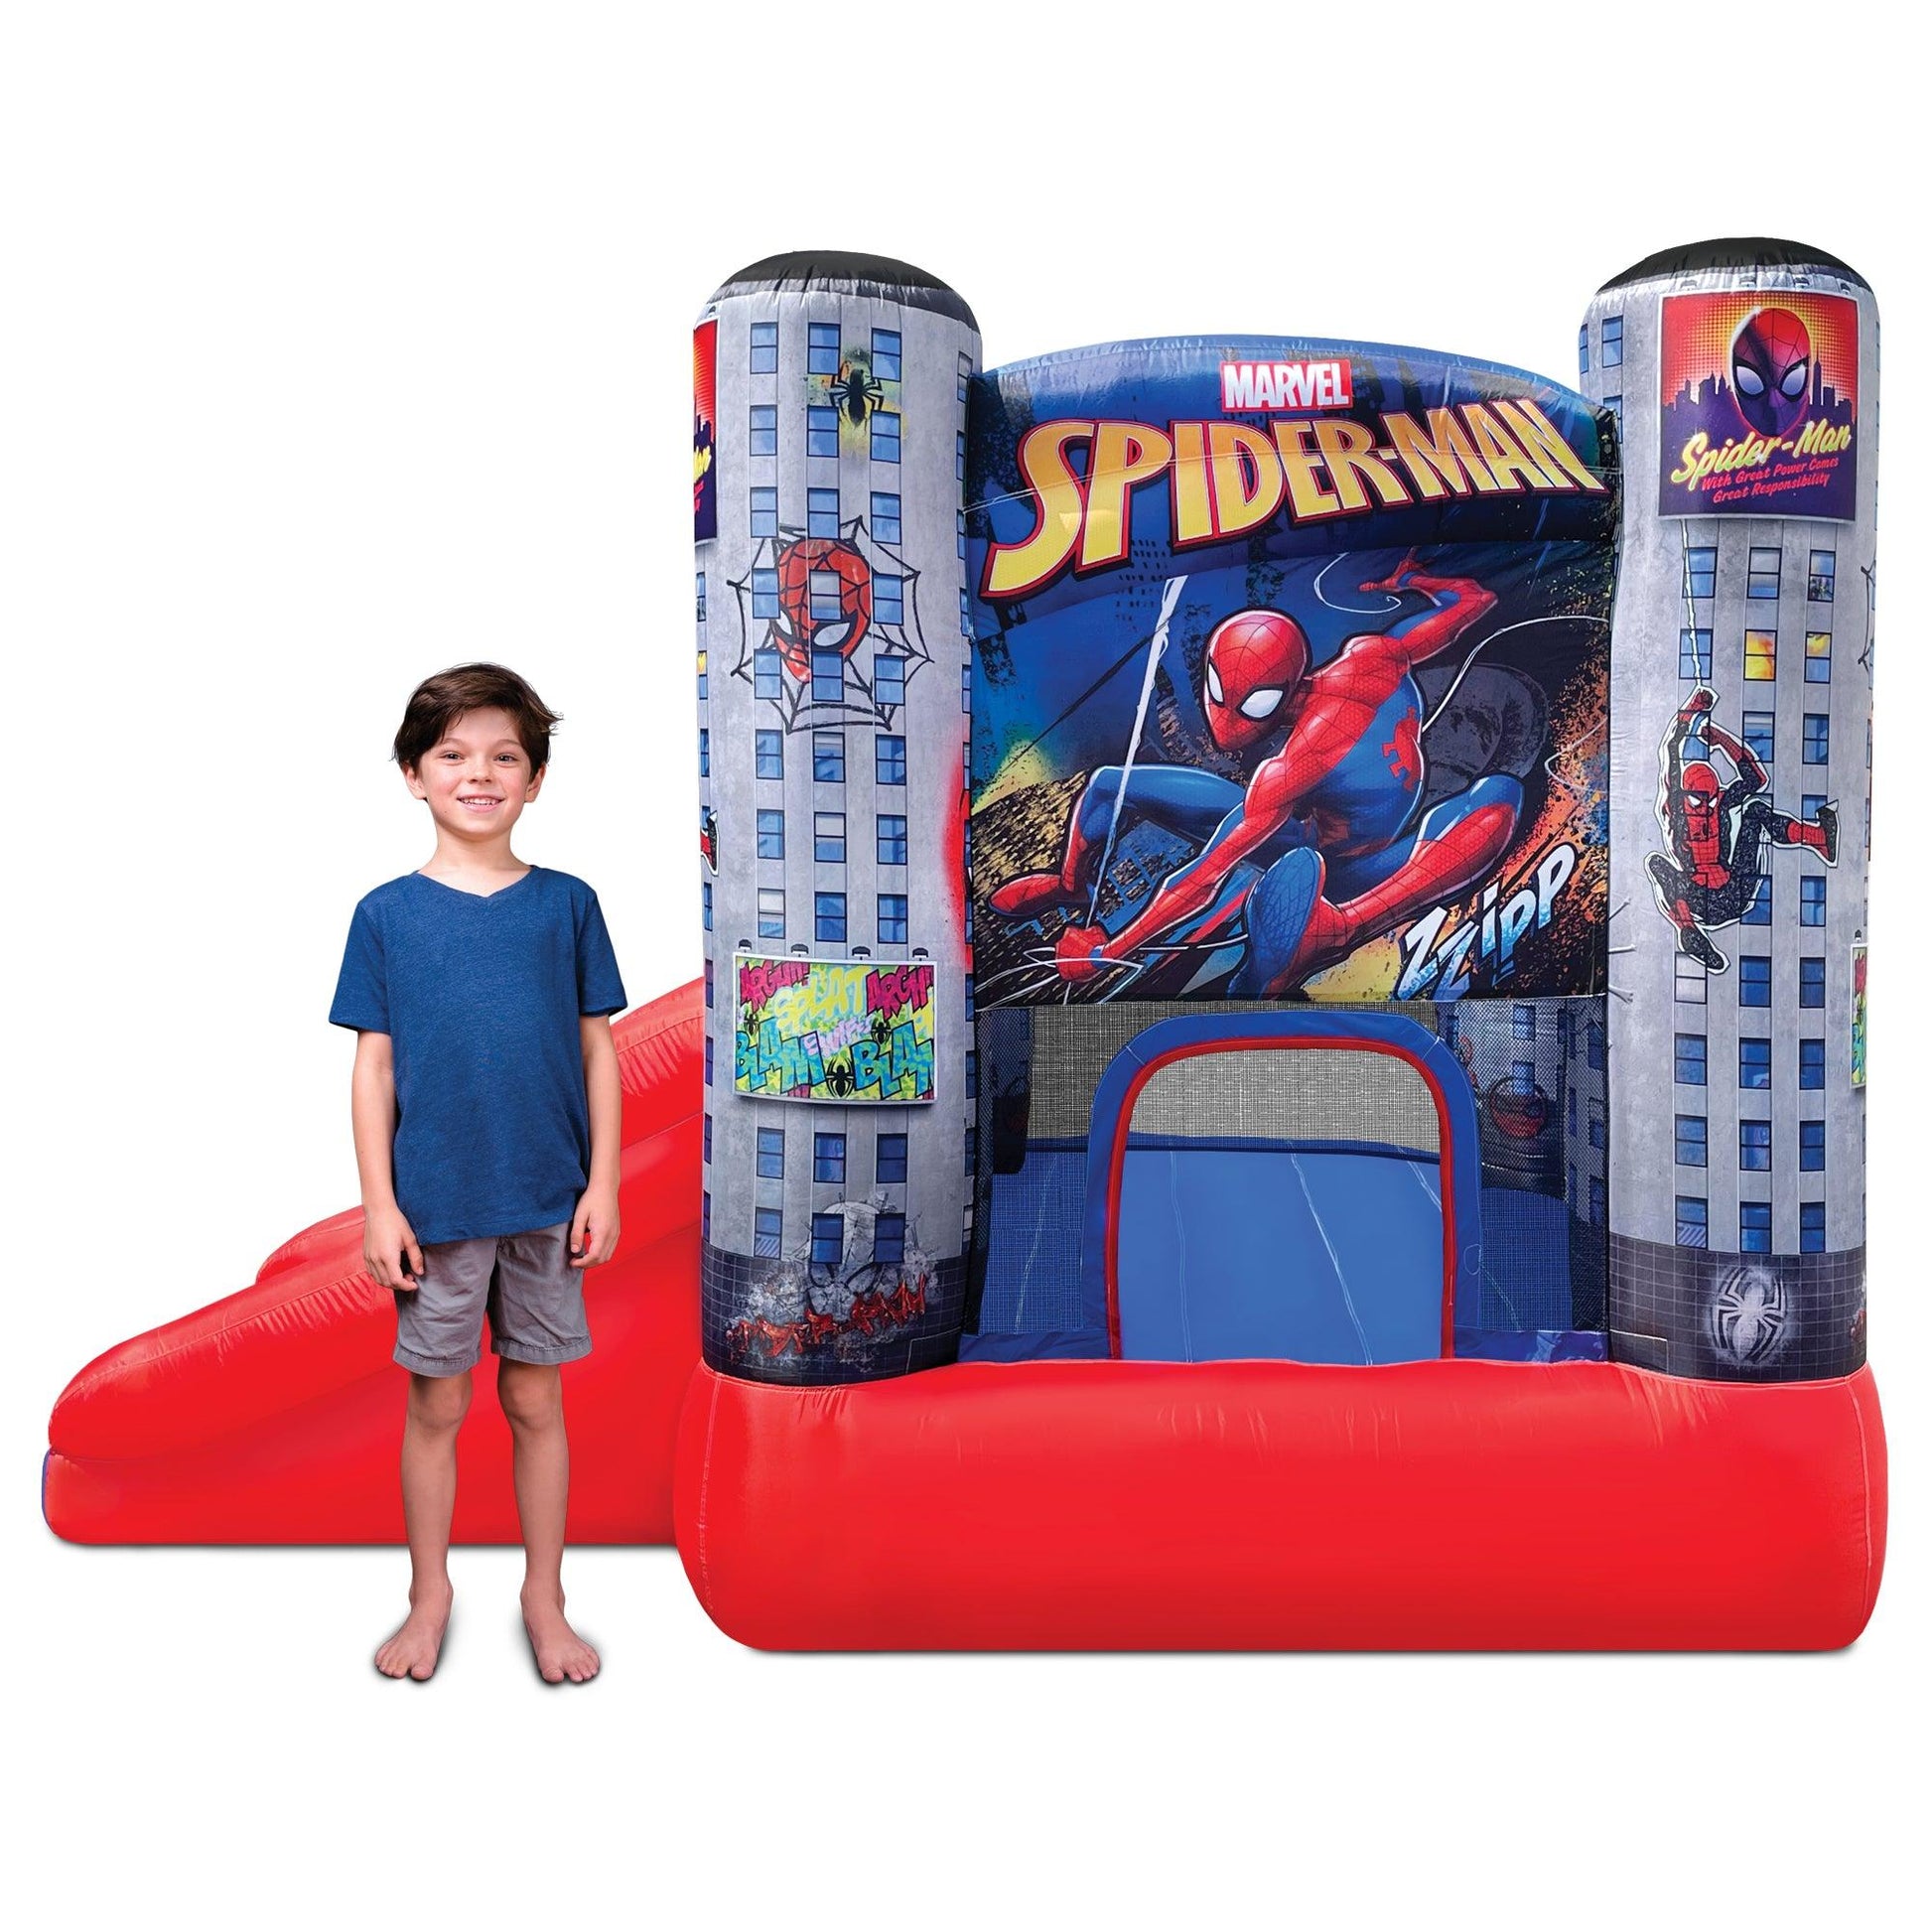 Spider-Man Bounce and Slide Inflatable